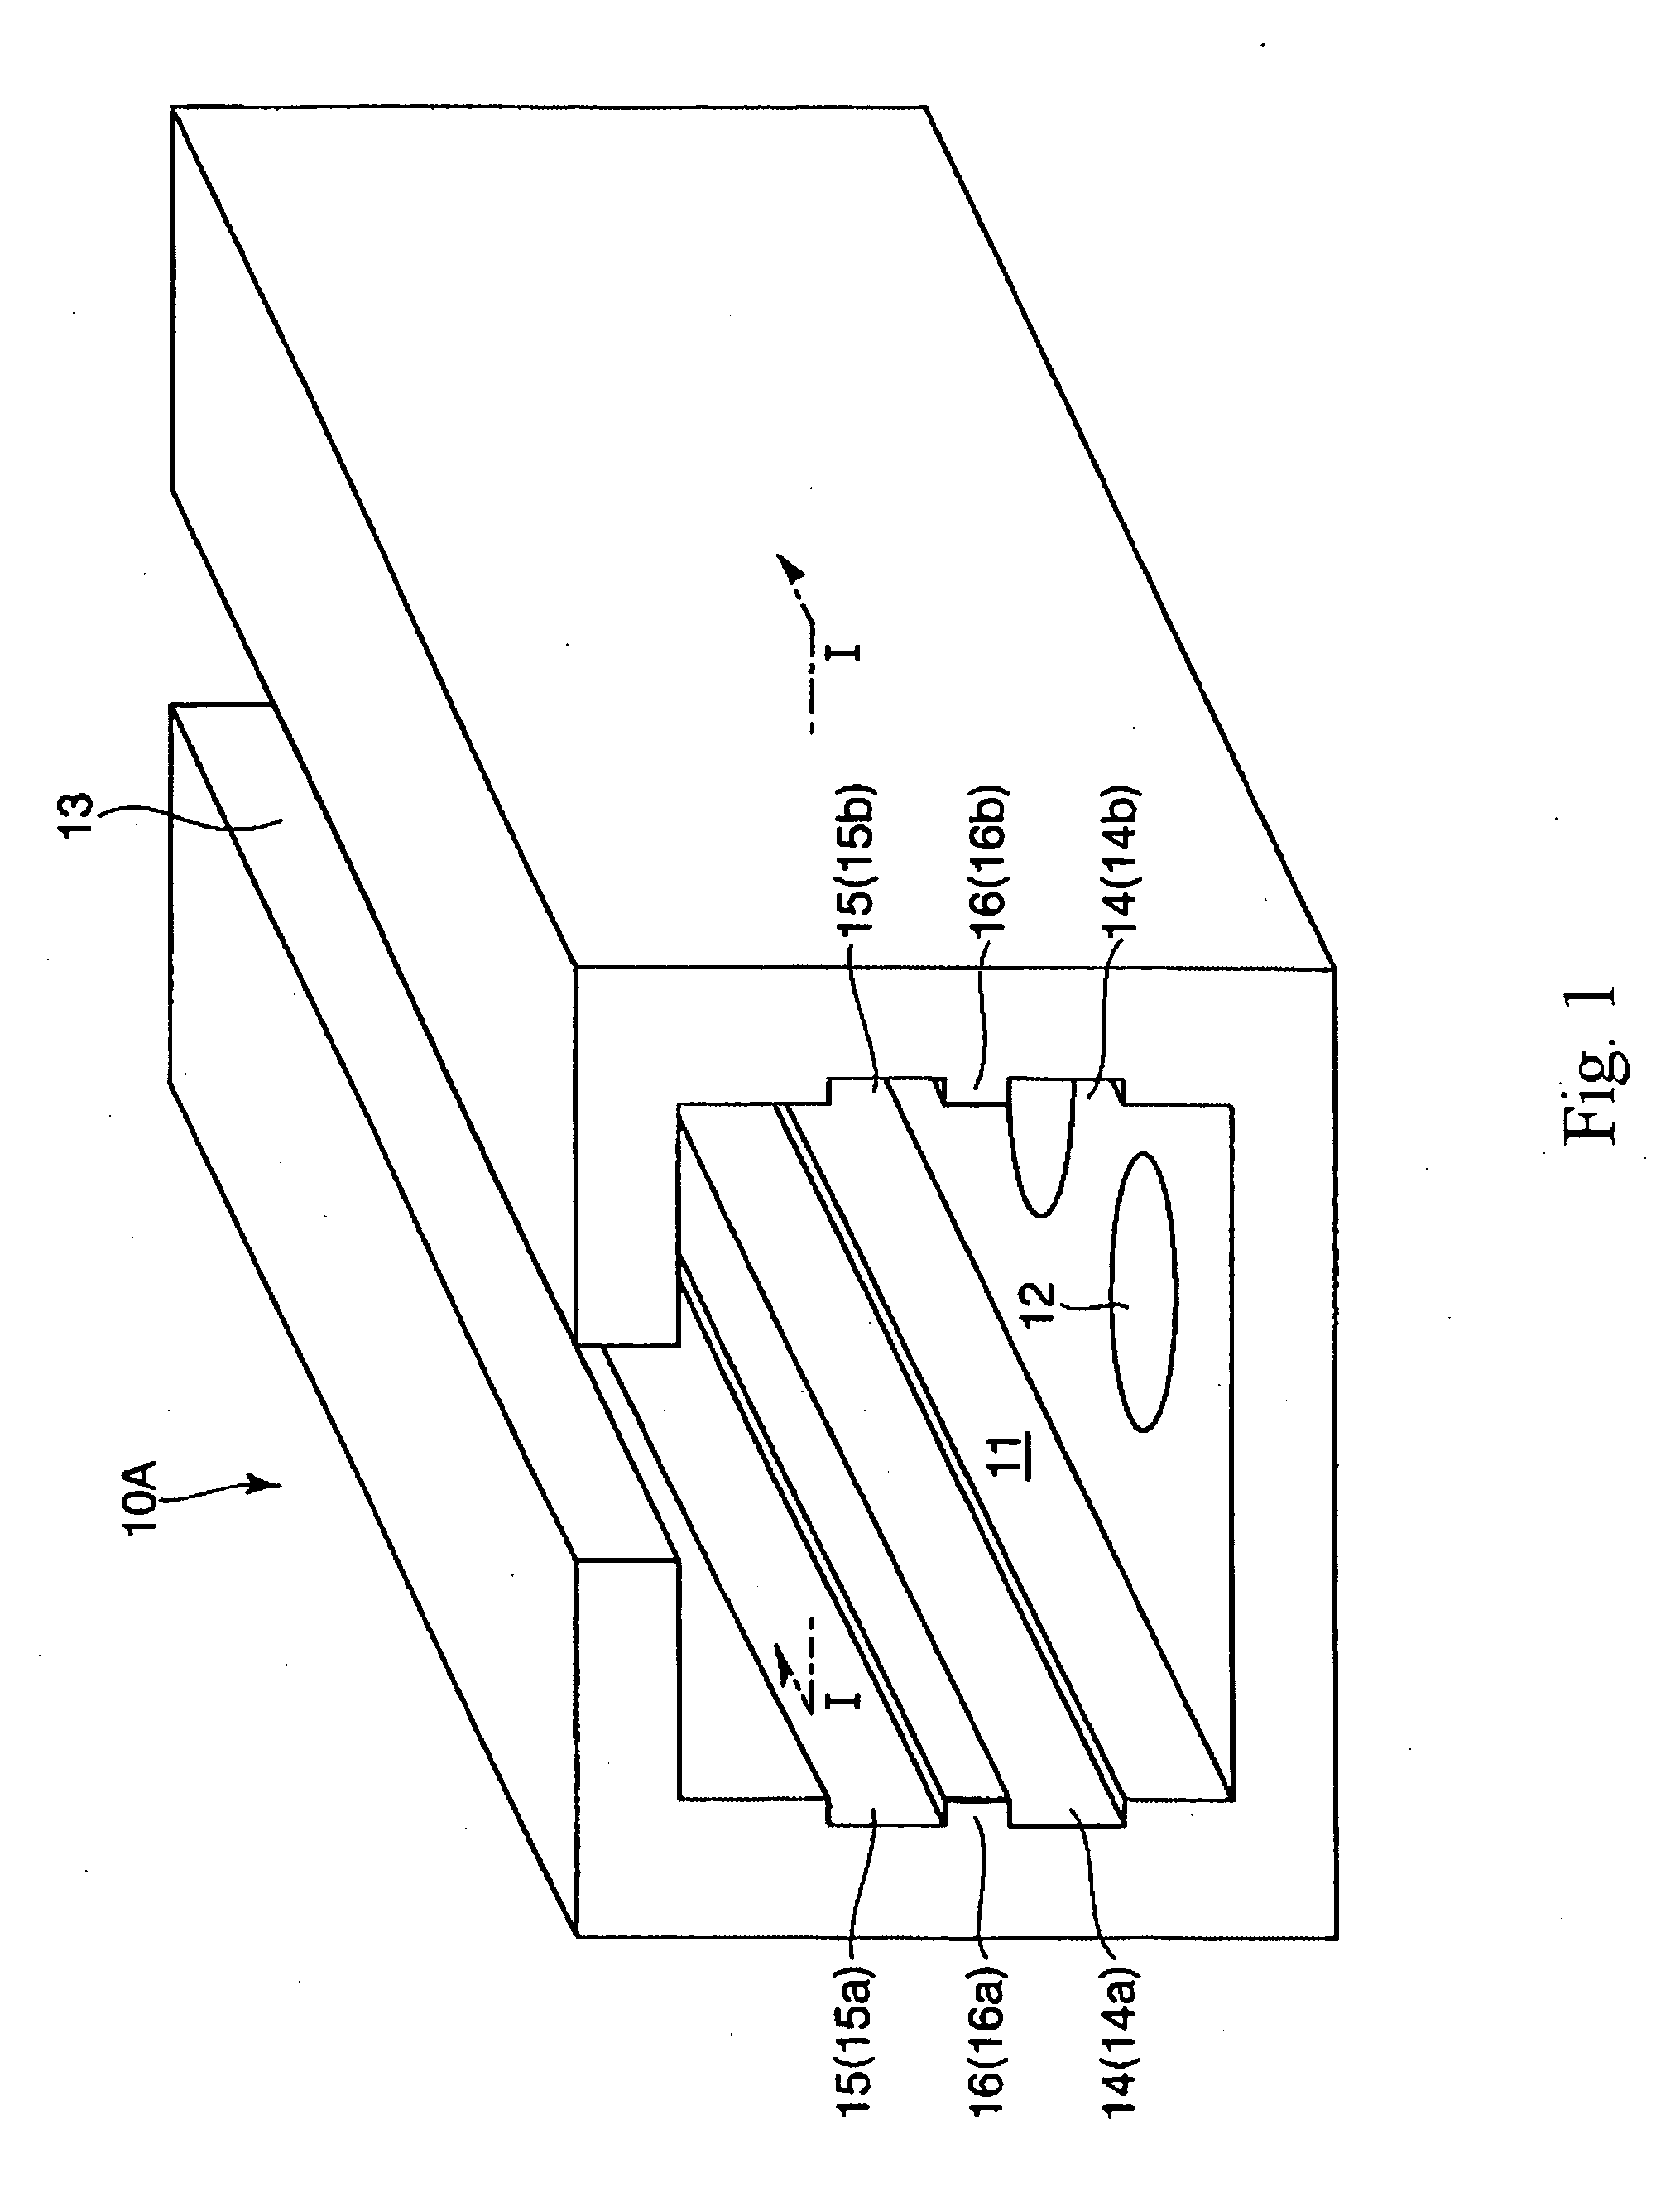 Apparatus used for manufacturing semiconductor device, method of manufacturing the semiconductor devices, and semiconductor device manufactured by the apparatus and method